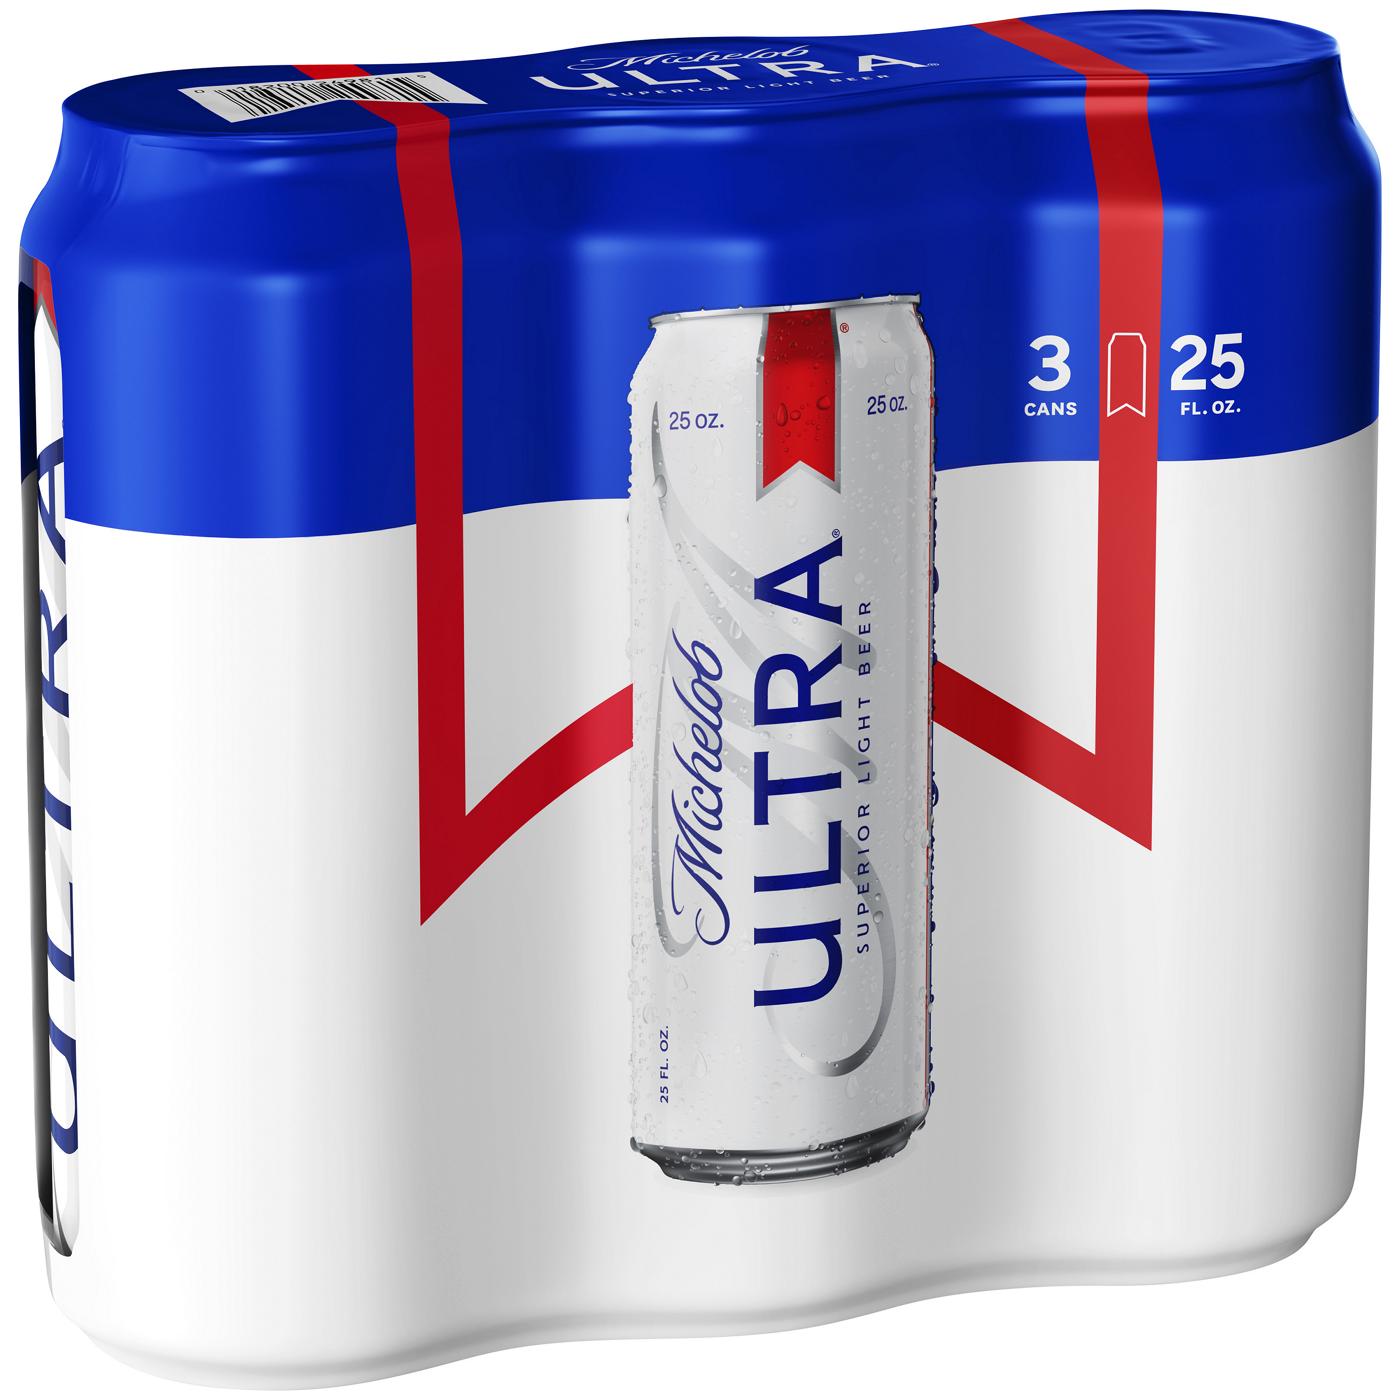 Michelob Ultra Light Beer 25 oz Cans; image 1 of 2